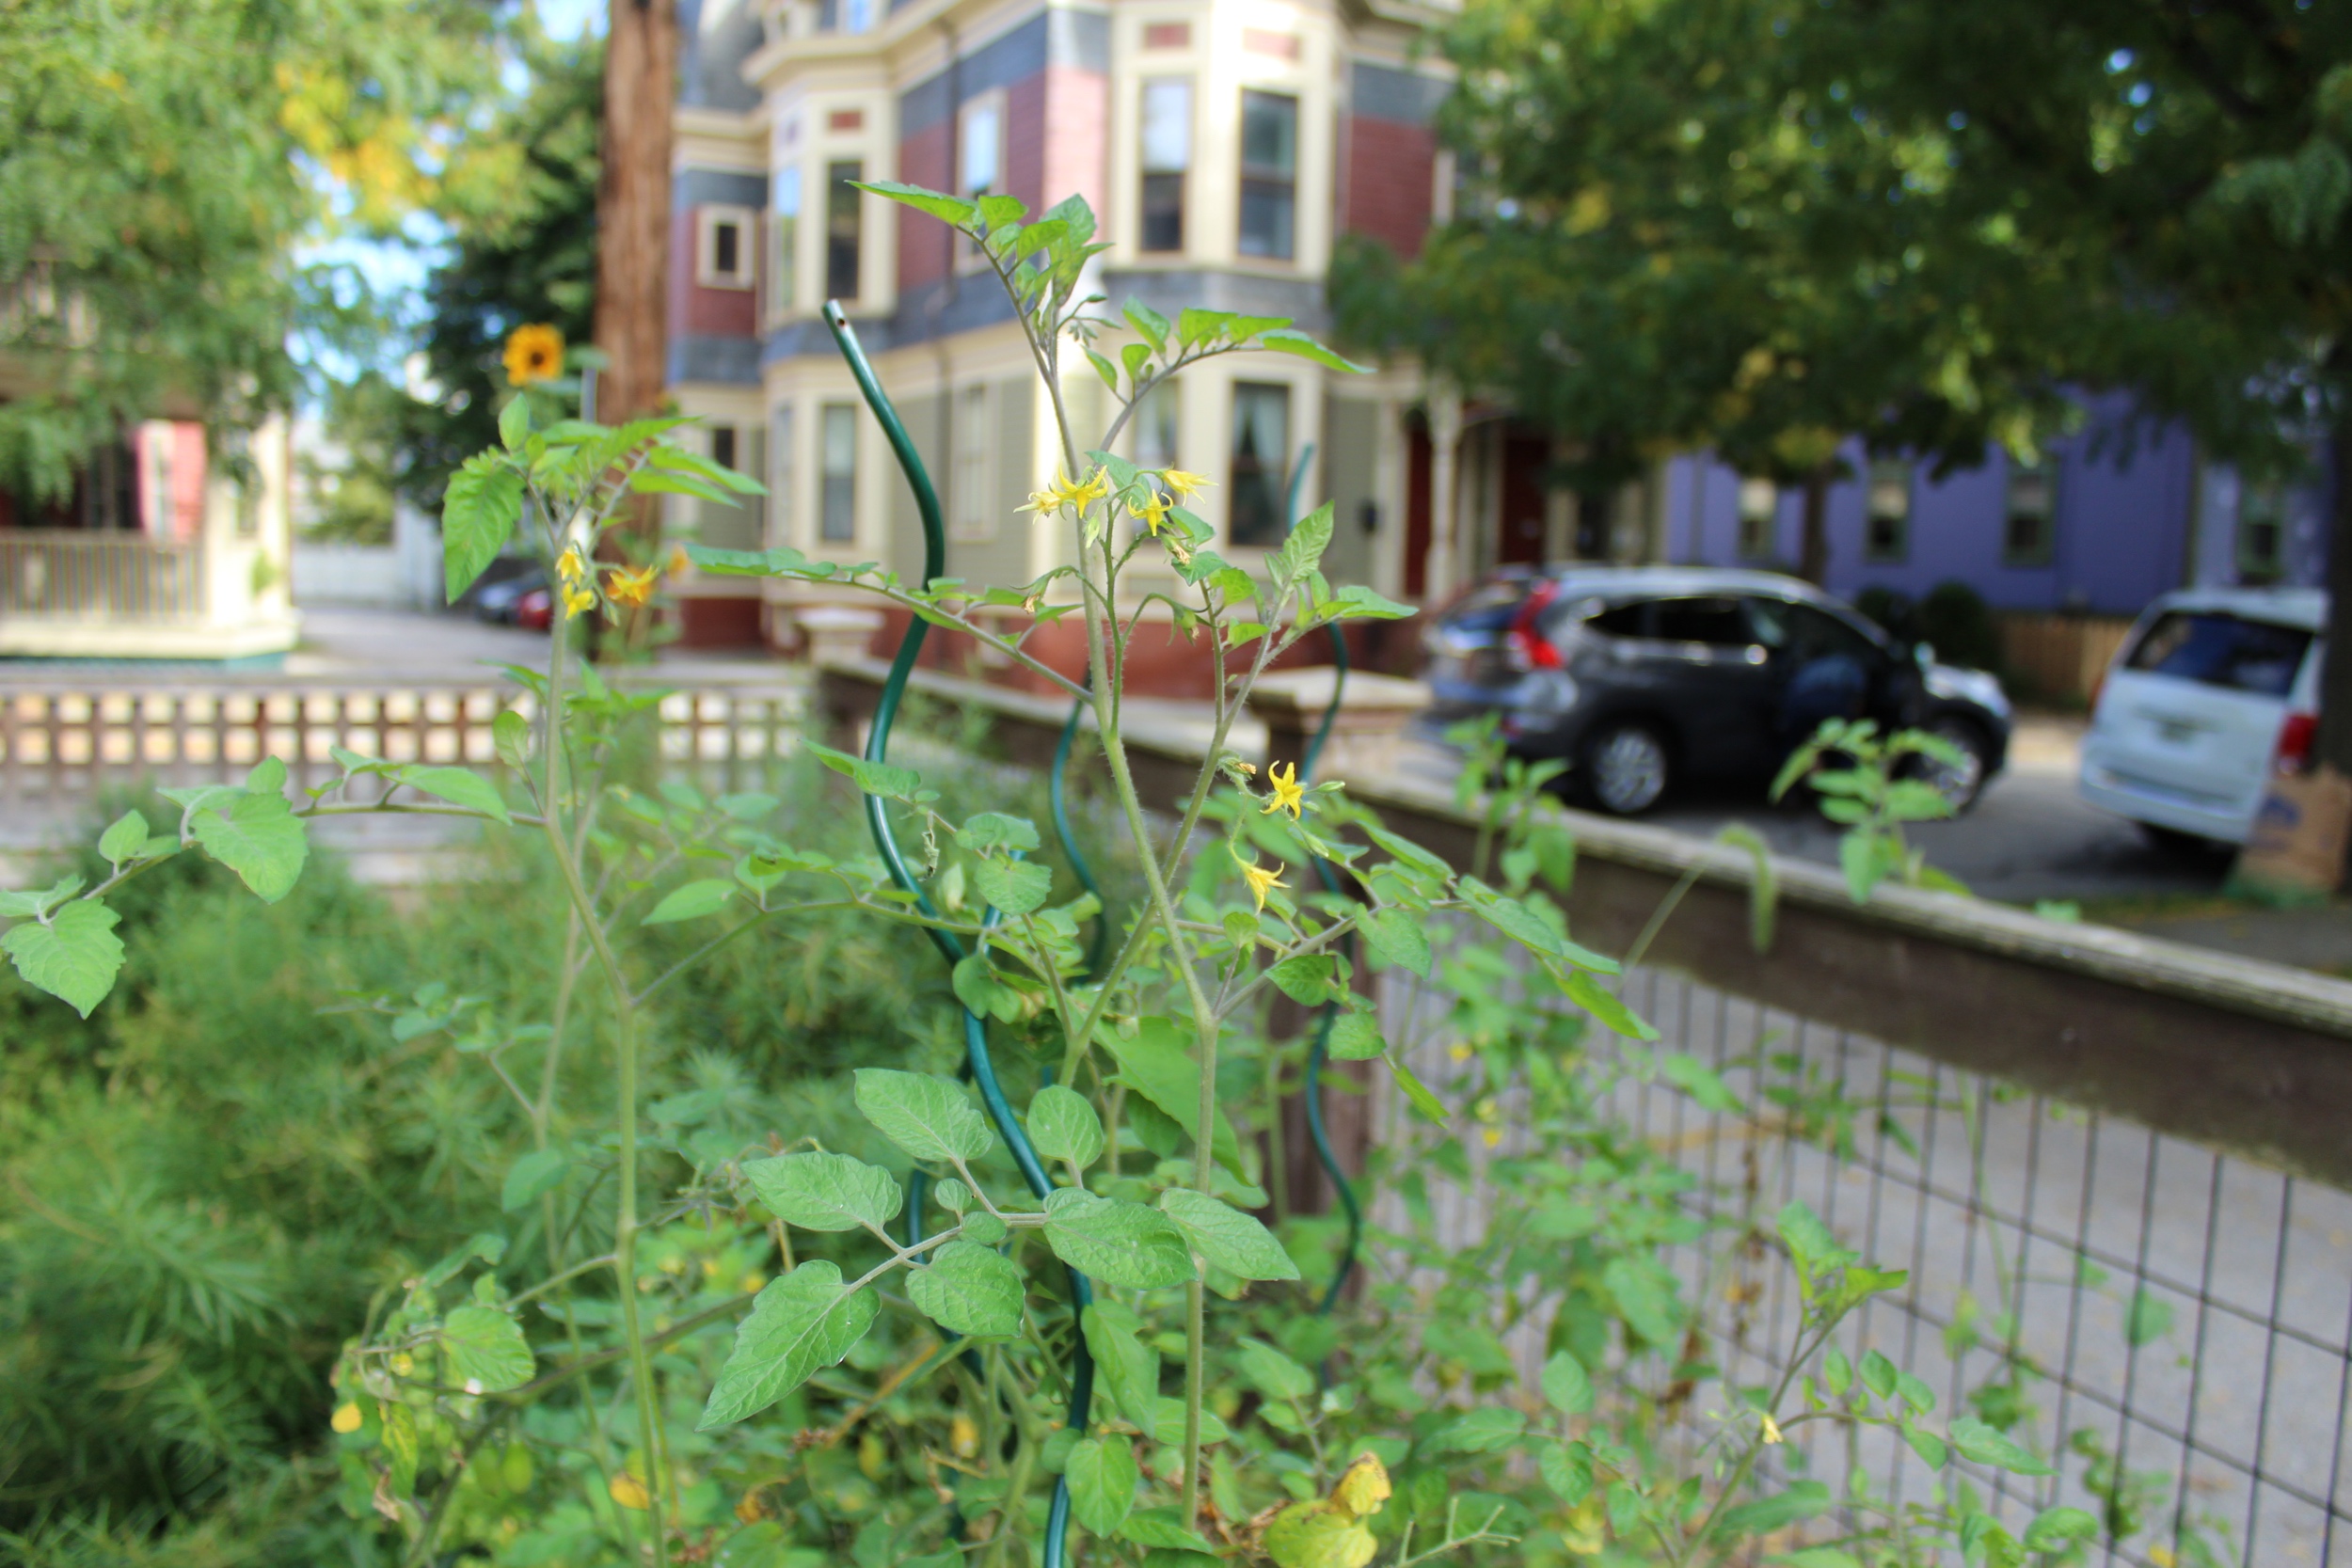  Gardens at Gilbert and Hammond Streets Photo by Jessica Jennings 